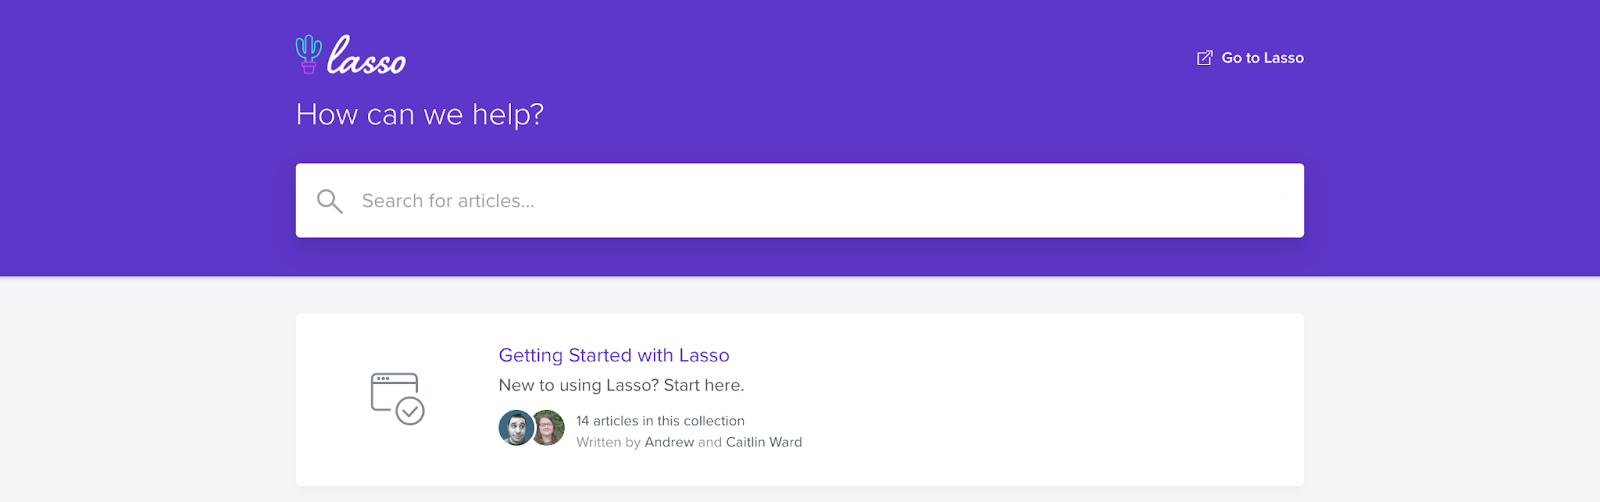 lasso help page